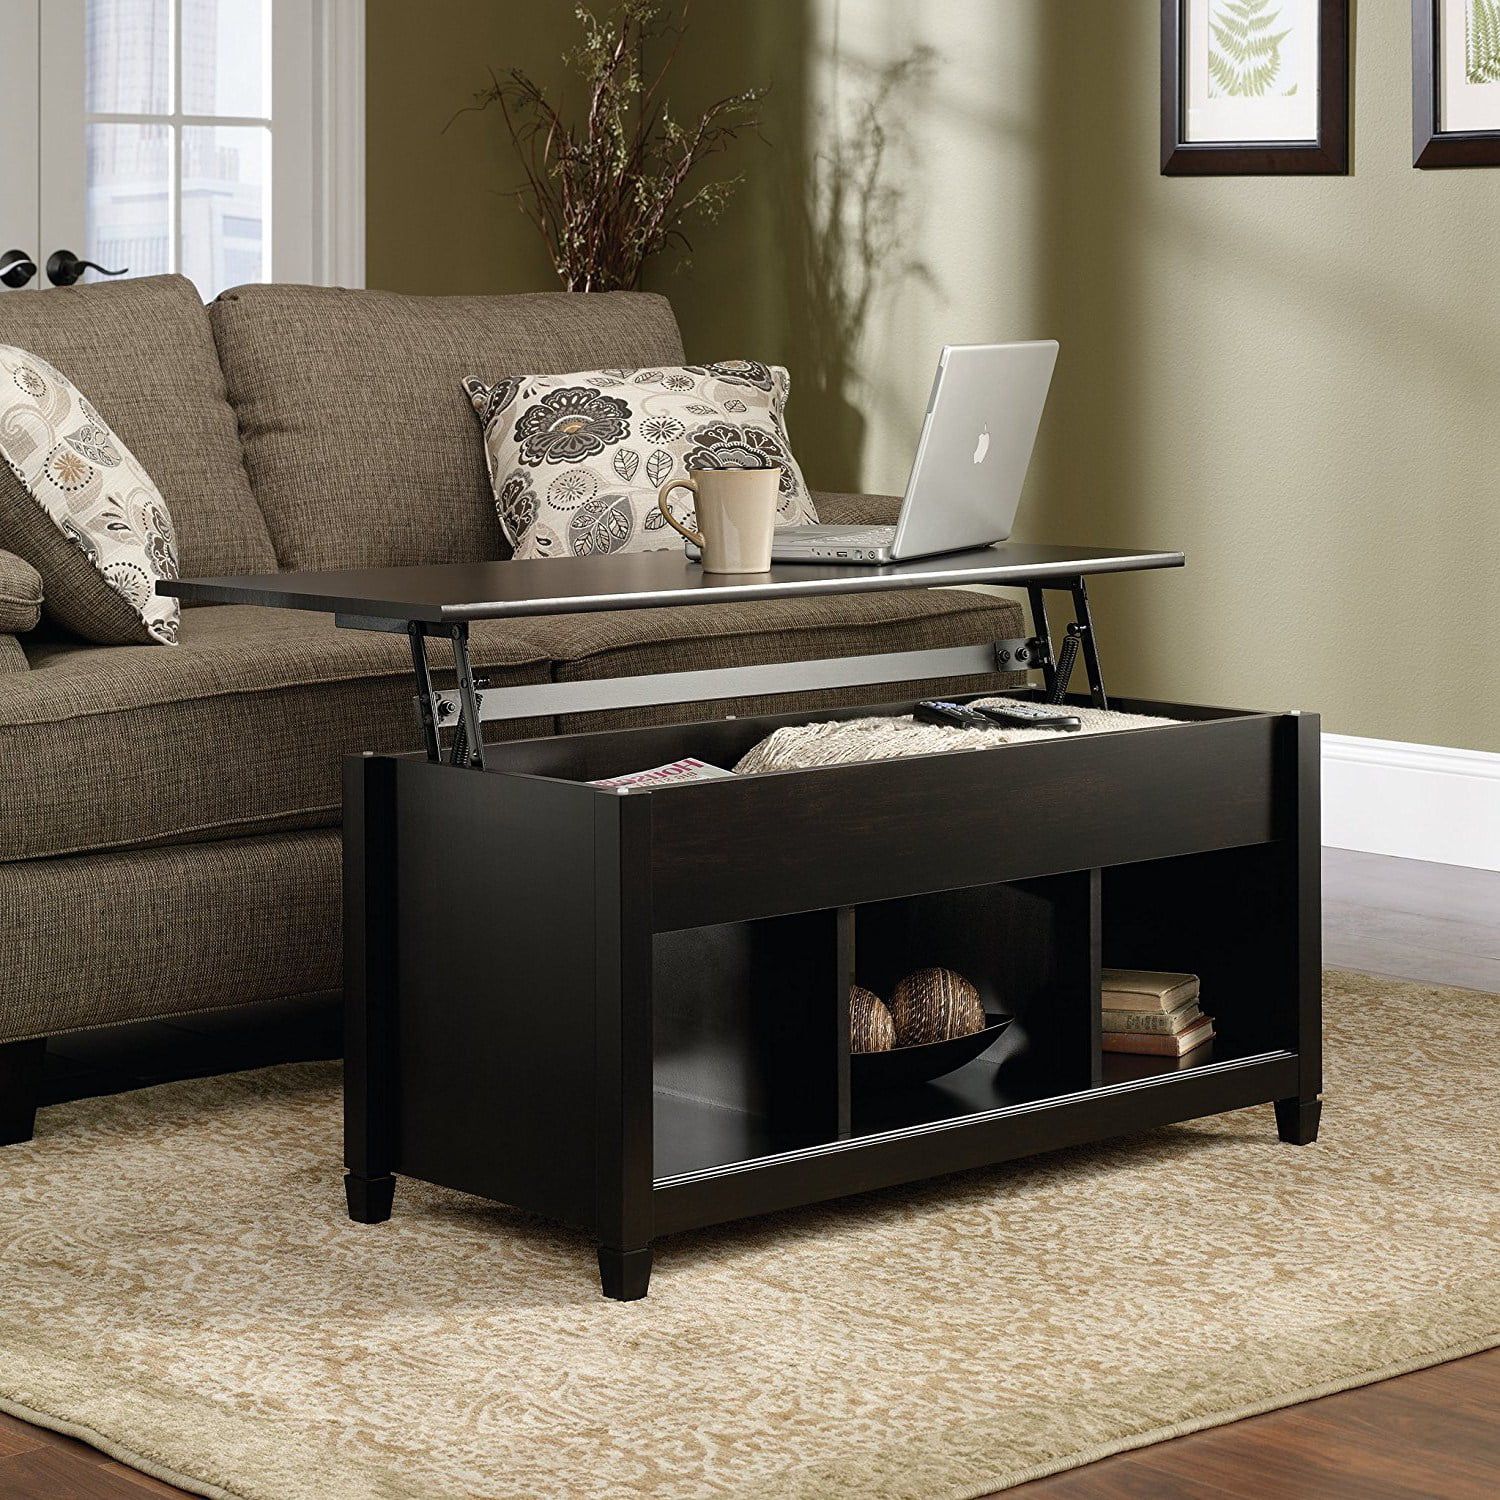 Zimtown Lift Up Top Coffee Table With Hidden Compartment End Rectangle For Lift Top Coffee Tables With Hidden Storage Compartments (View 12 of 15)